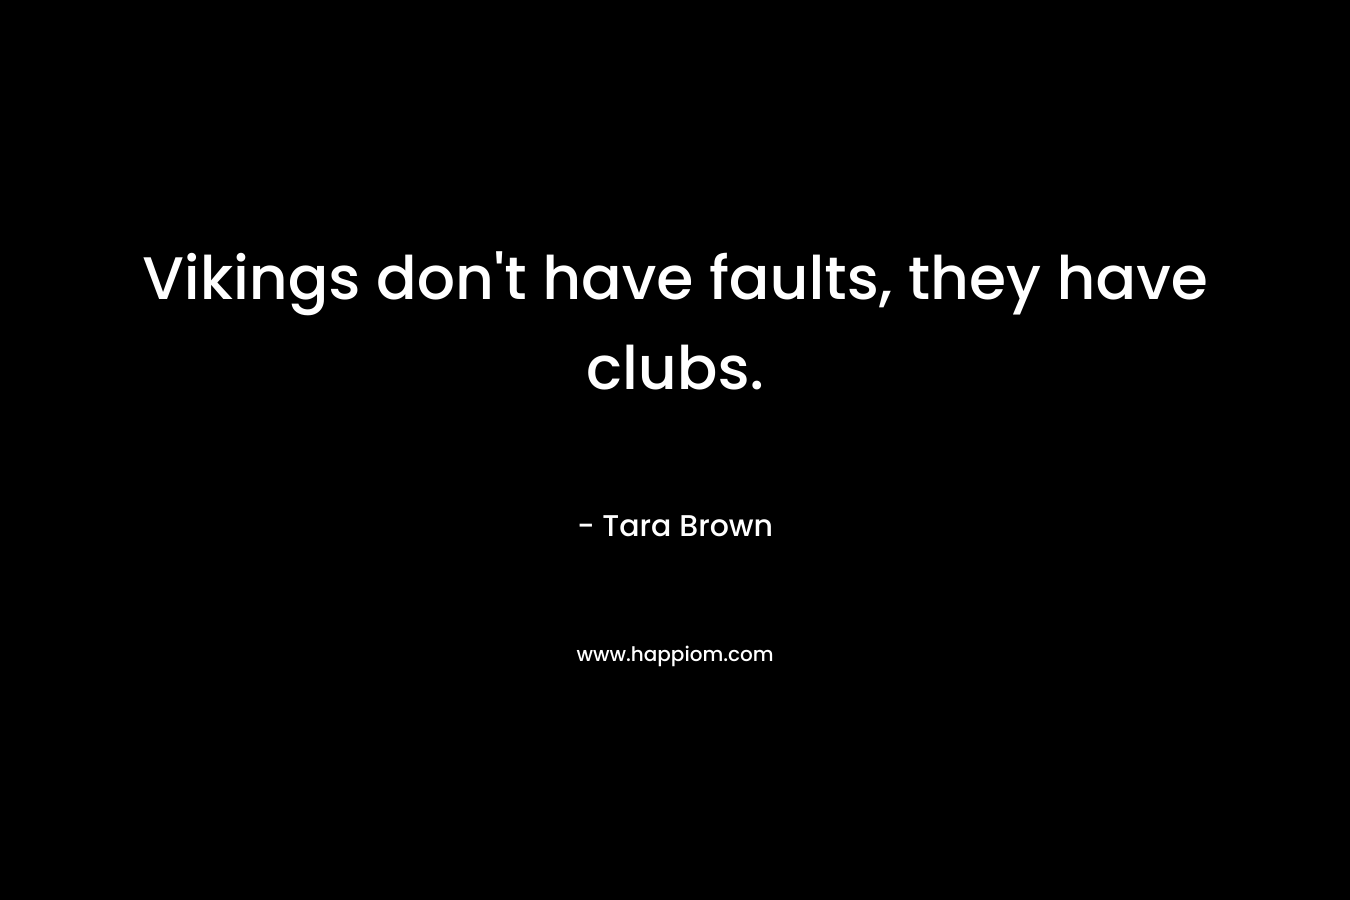 Vikings don’t have faults, they have clubs. – Tara Brown